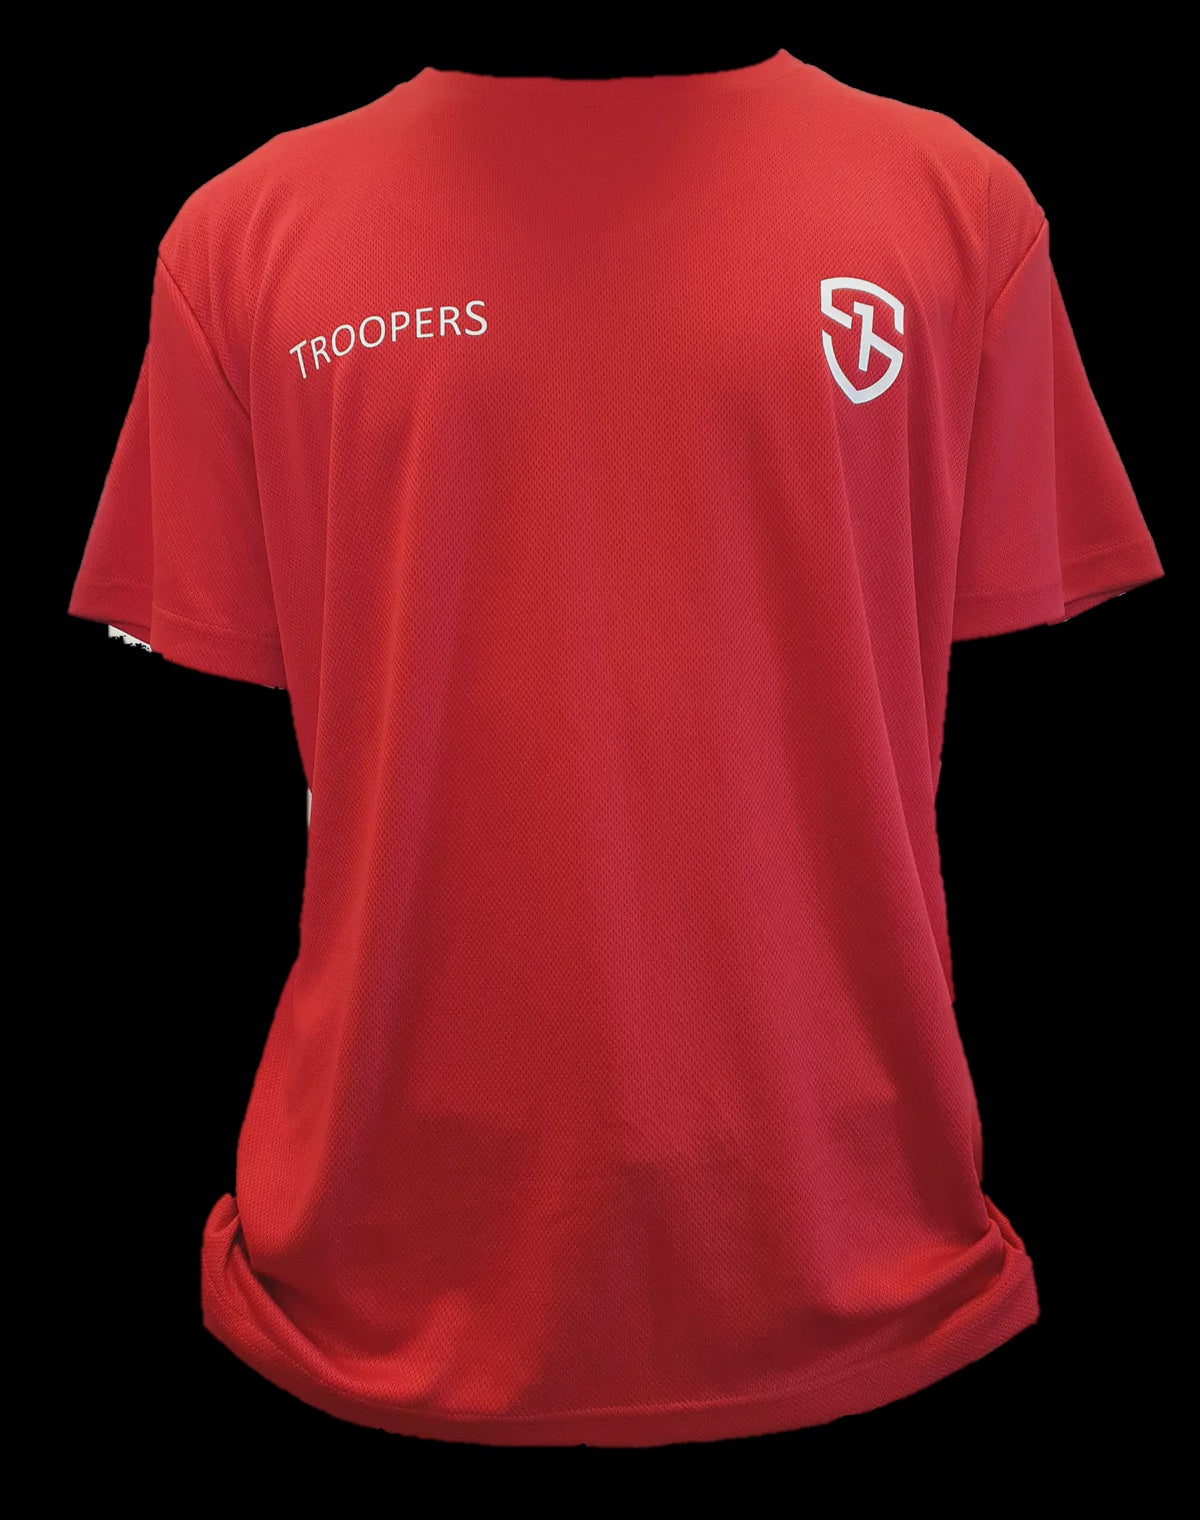 House Sports T-shirt - Troopers (Red) Size 10